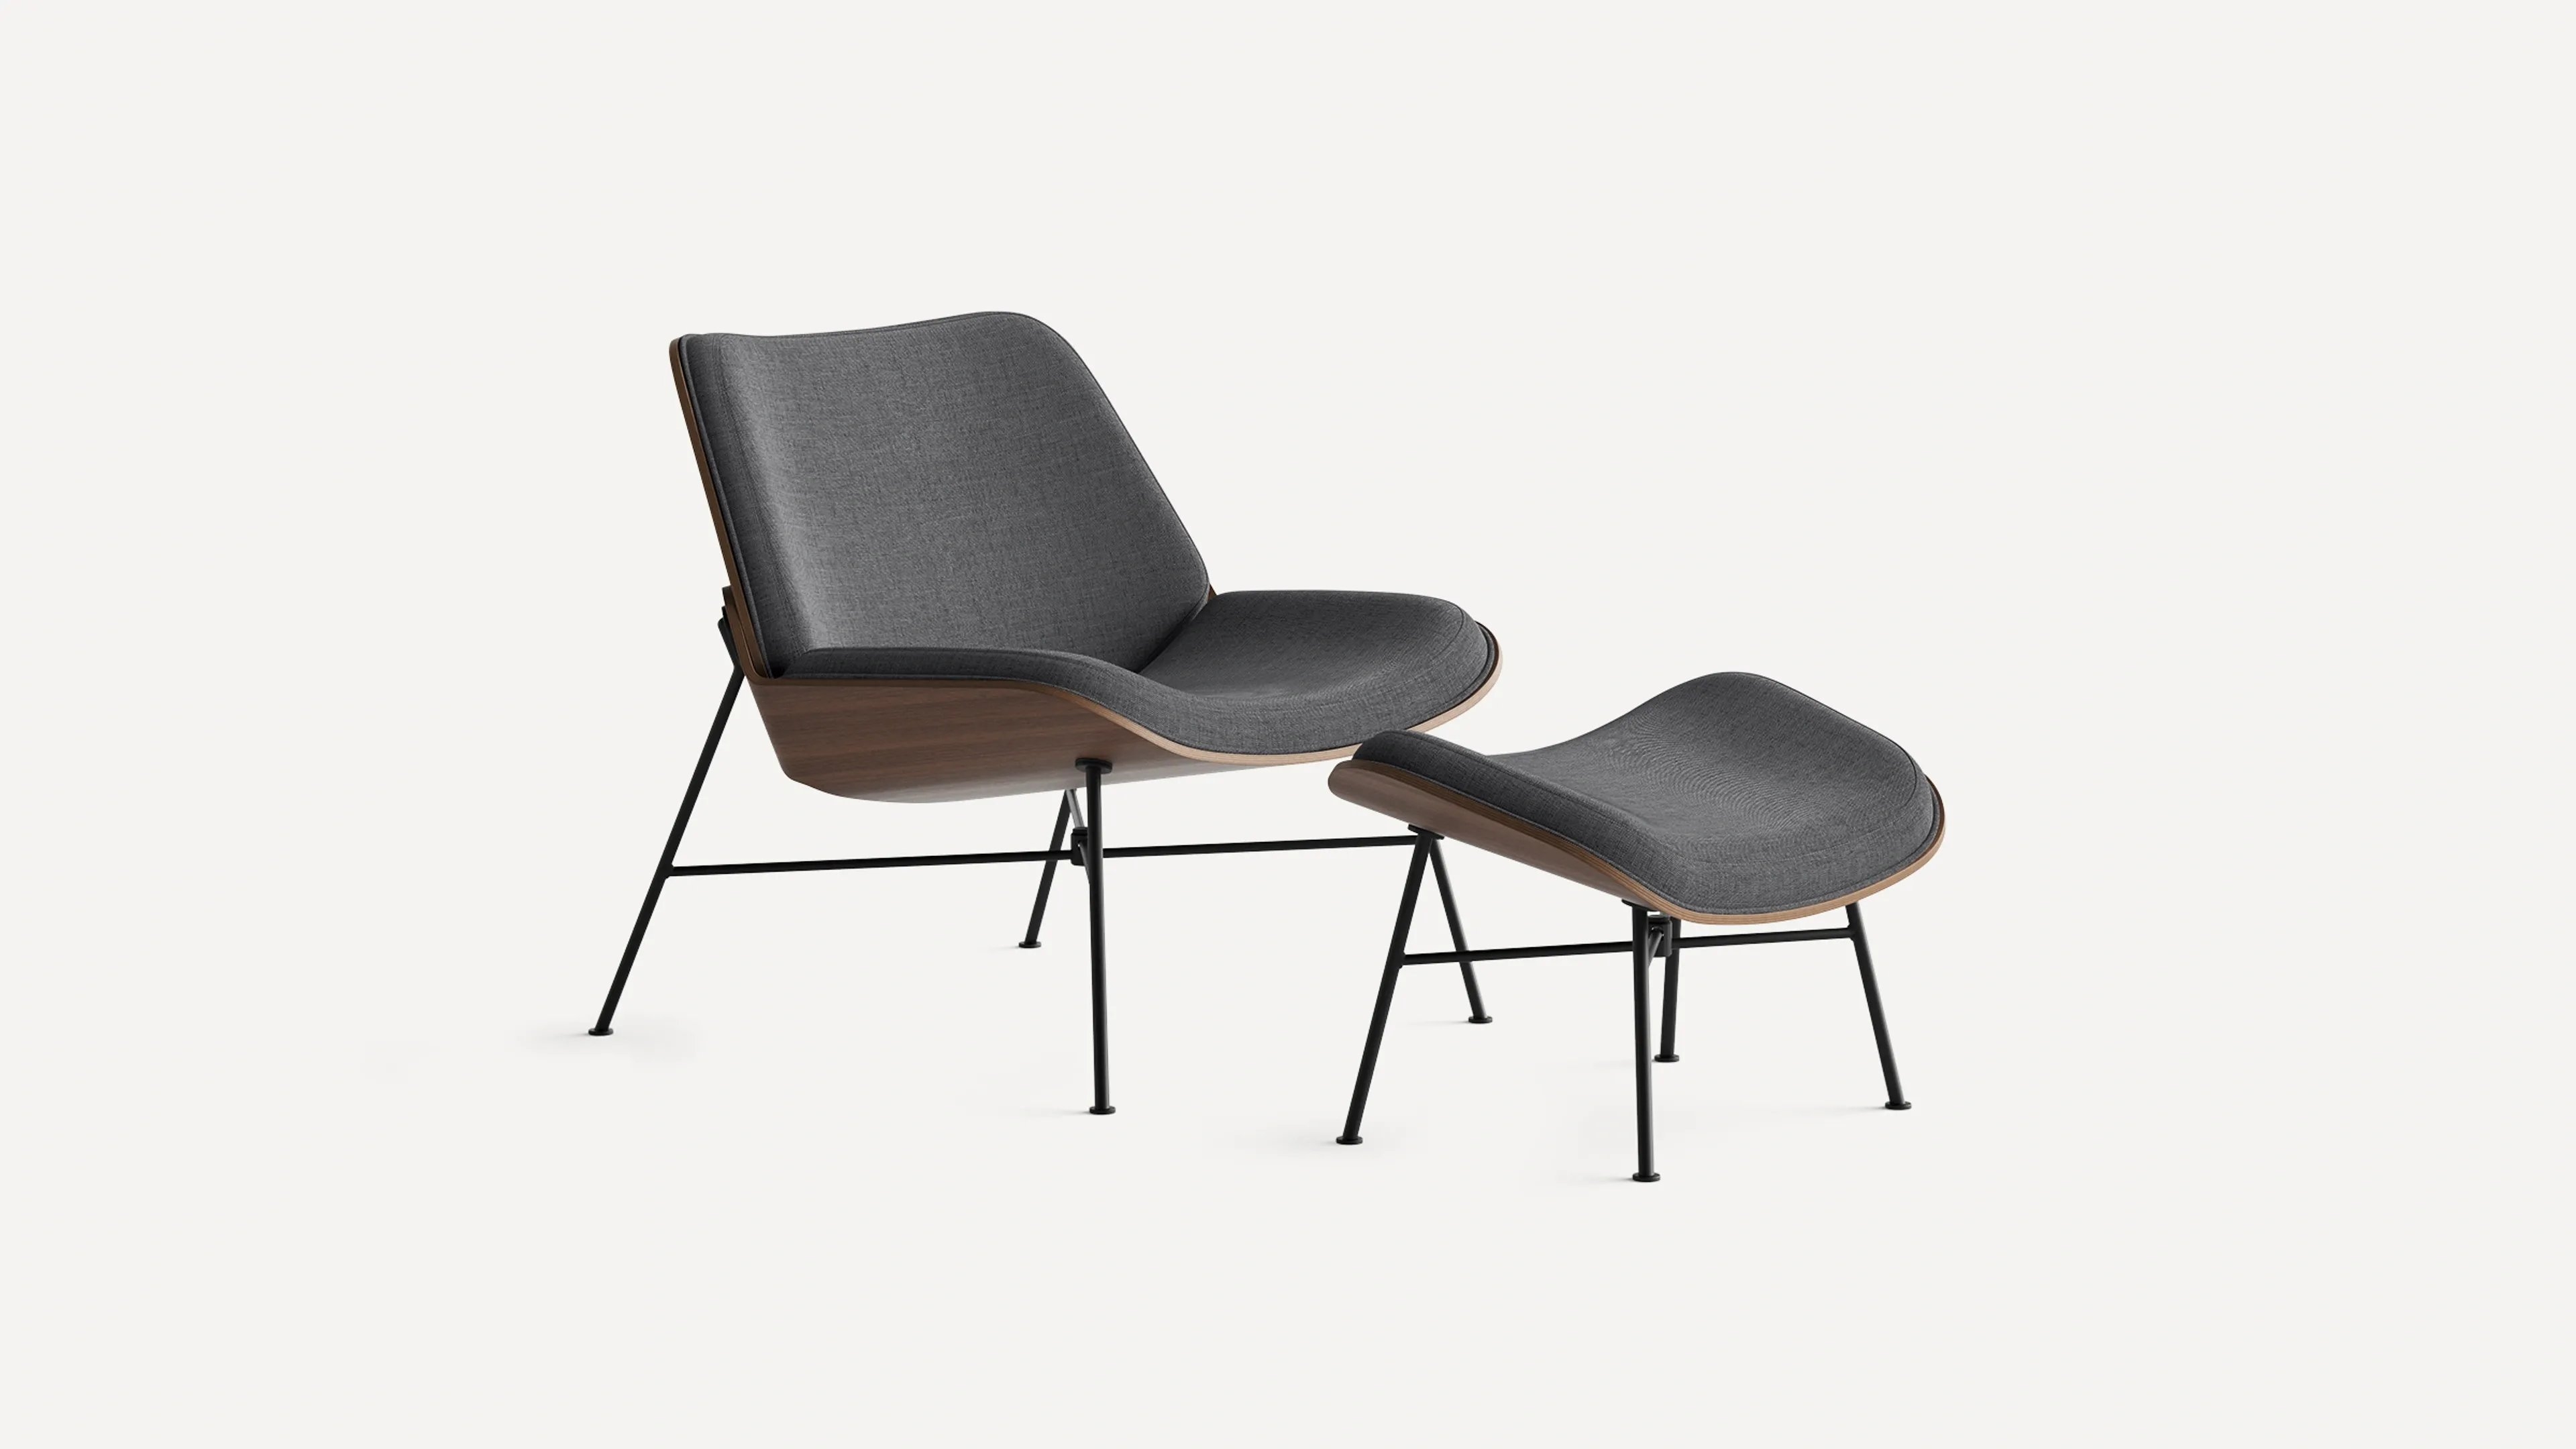 Vesper Fabric & Wood Lounge Chair in Heather Charcoal/Walnut - Image 1